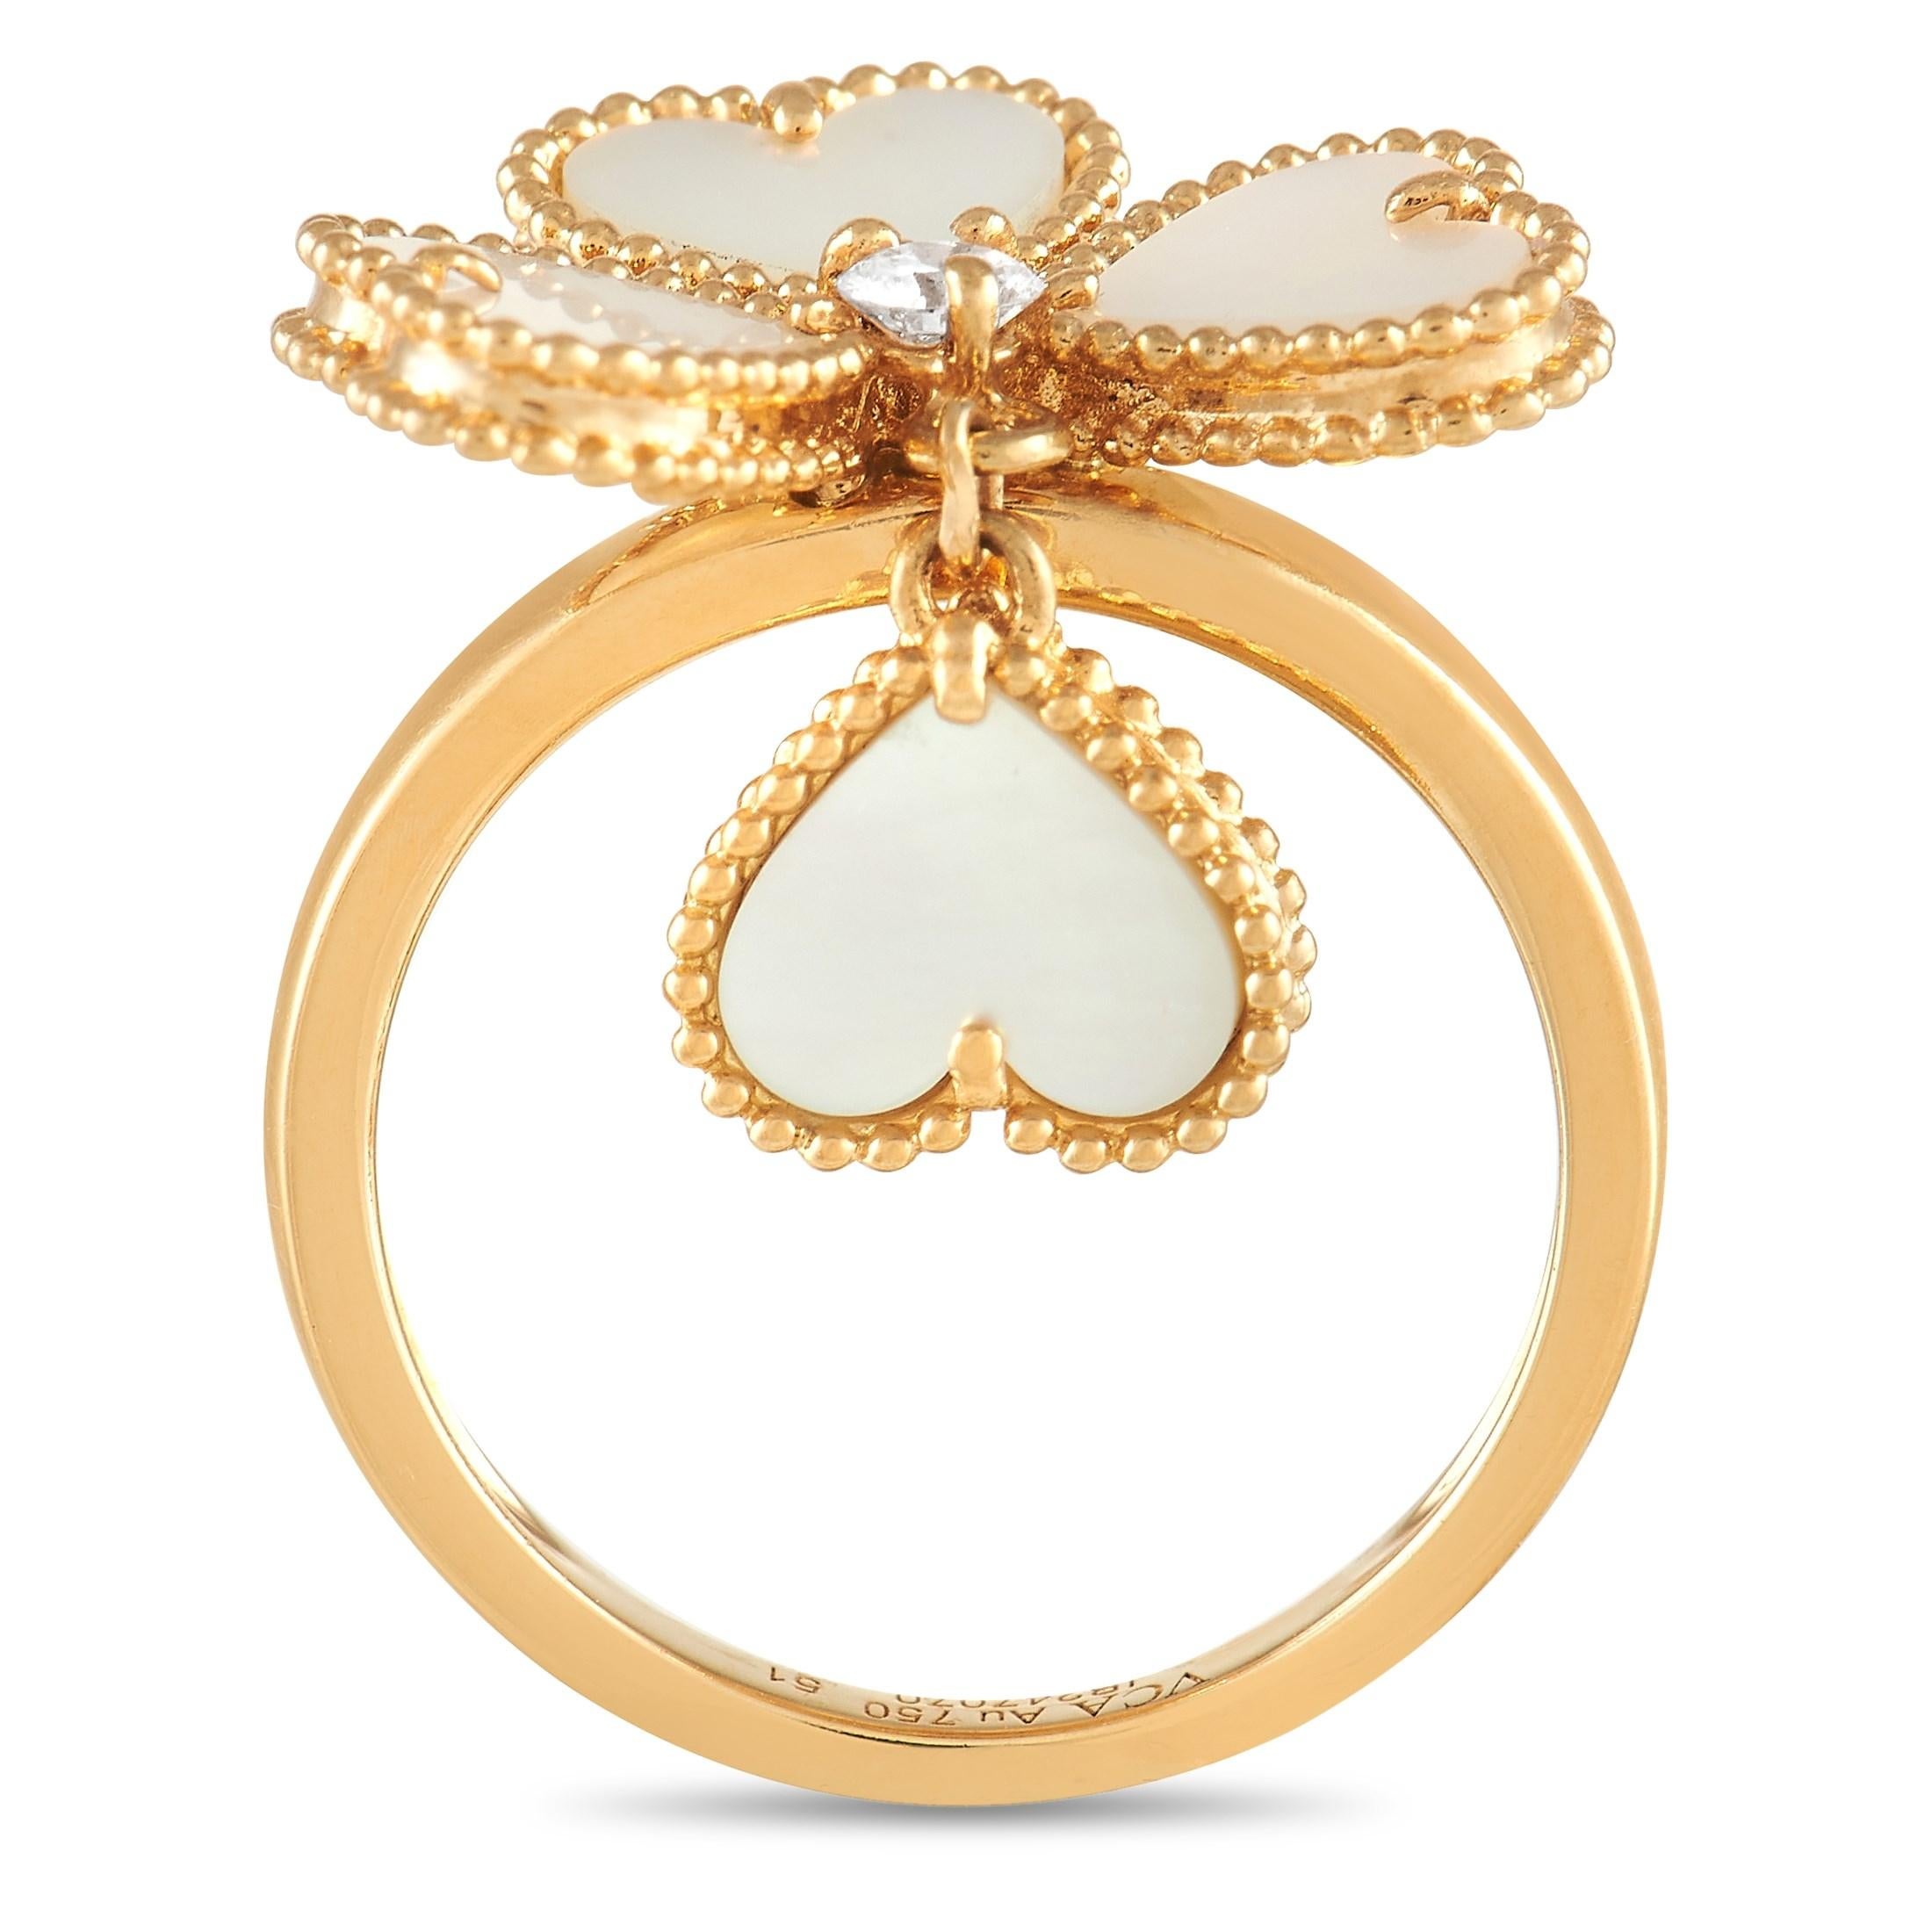 Here is an elegant ring that stands out without trying. This Sweet Alhambra Effeuillage ring from Van Cleef & Arpels features a slim yellow gold band adorned with a floral motif centerpiece composed of four heart-shaped petals and a single